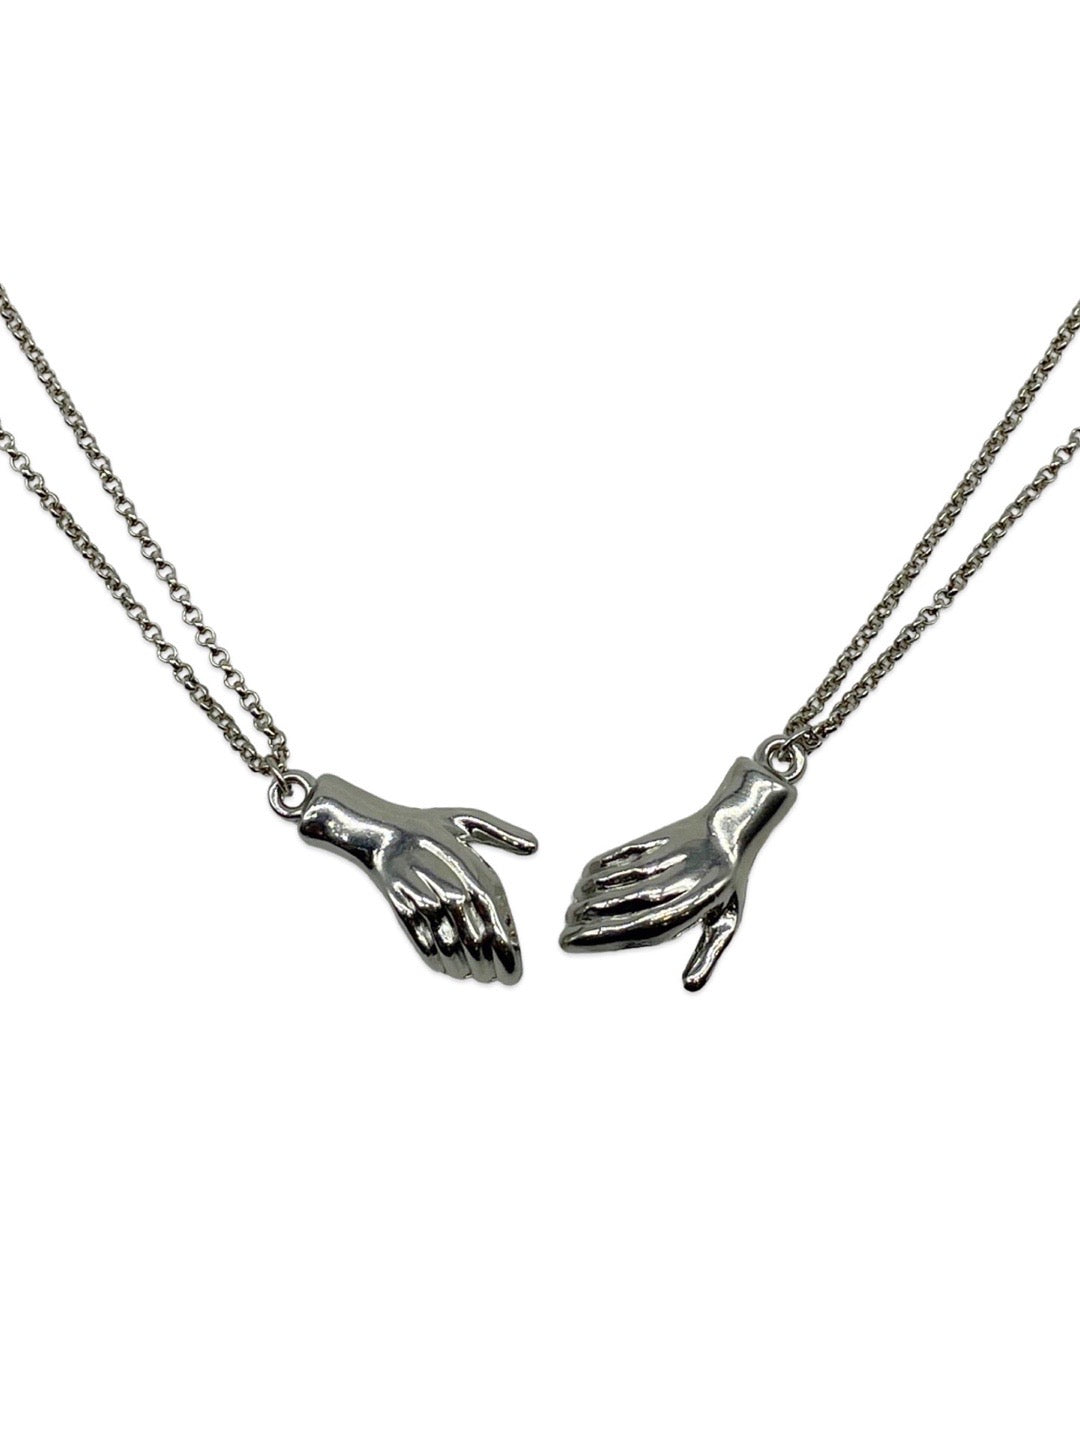 Friendship Necklace with Skeleton Hands and Heart